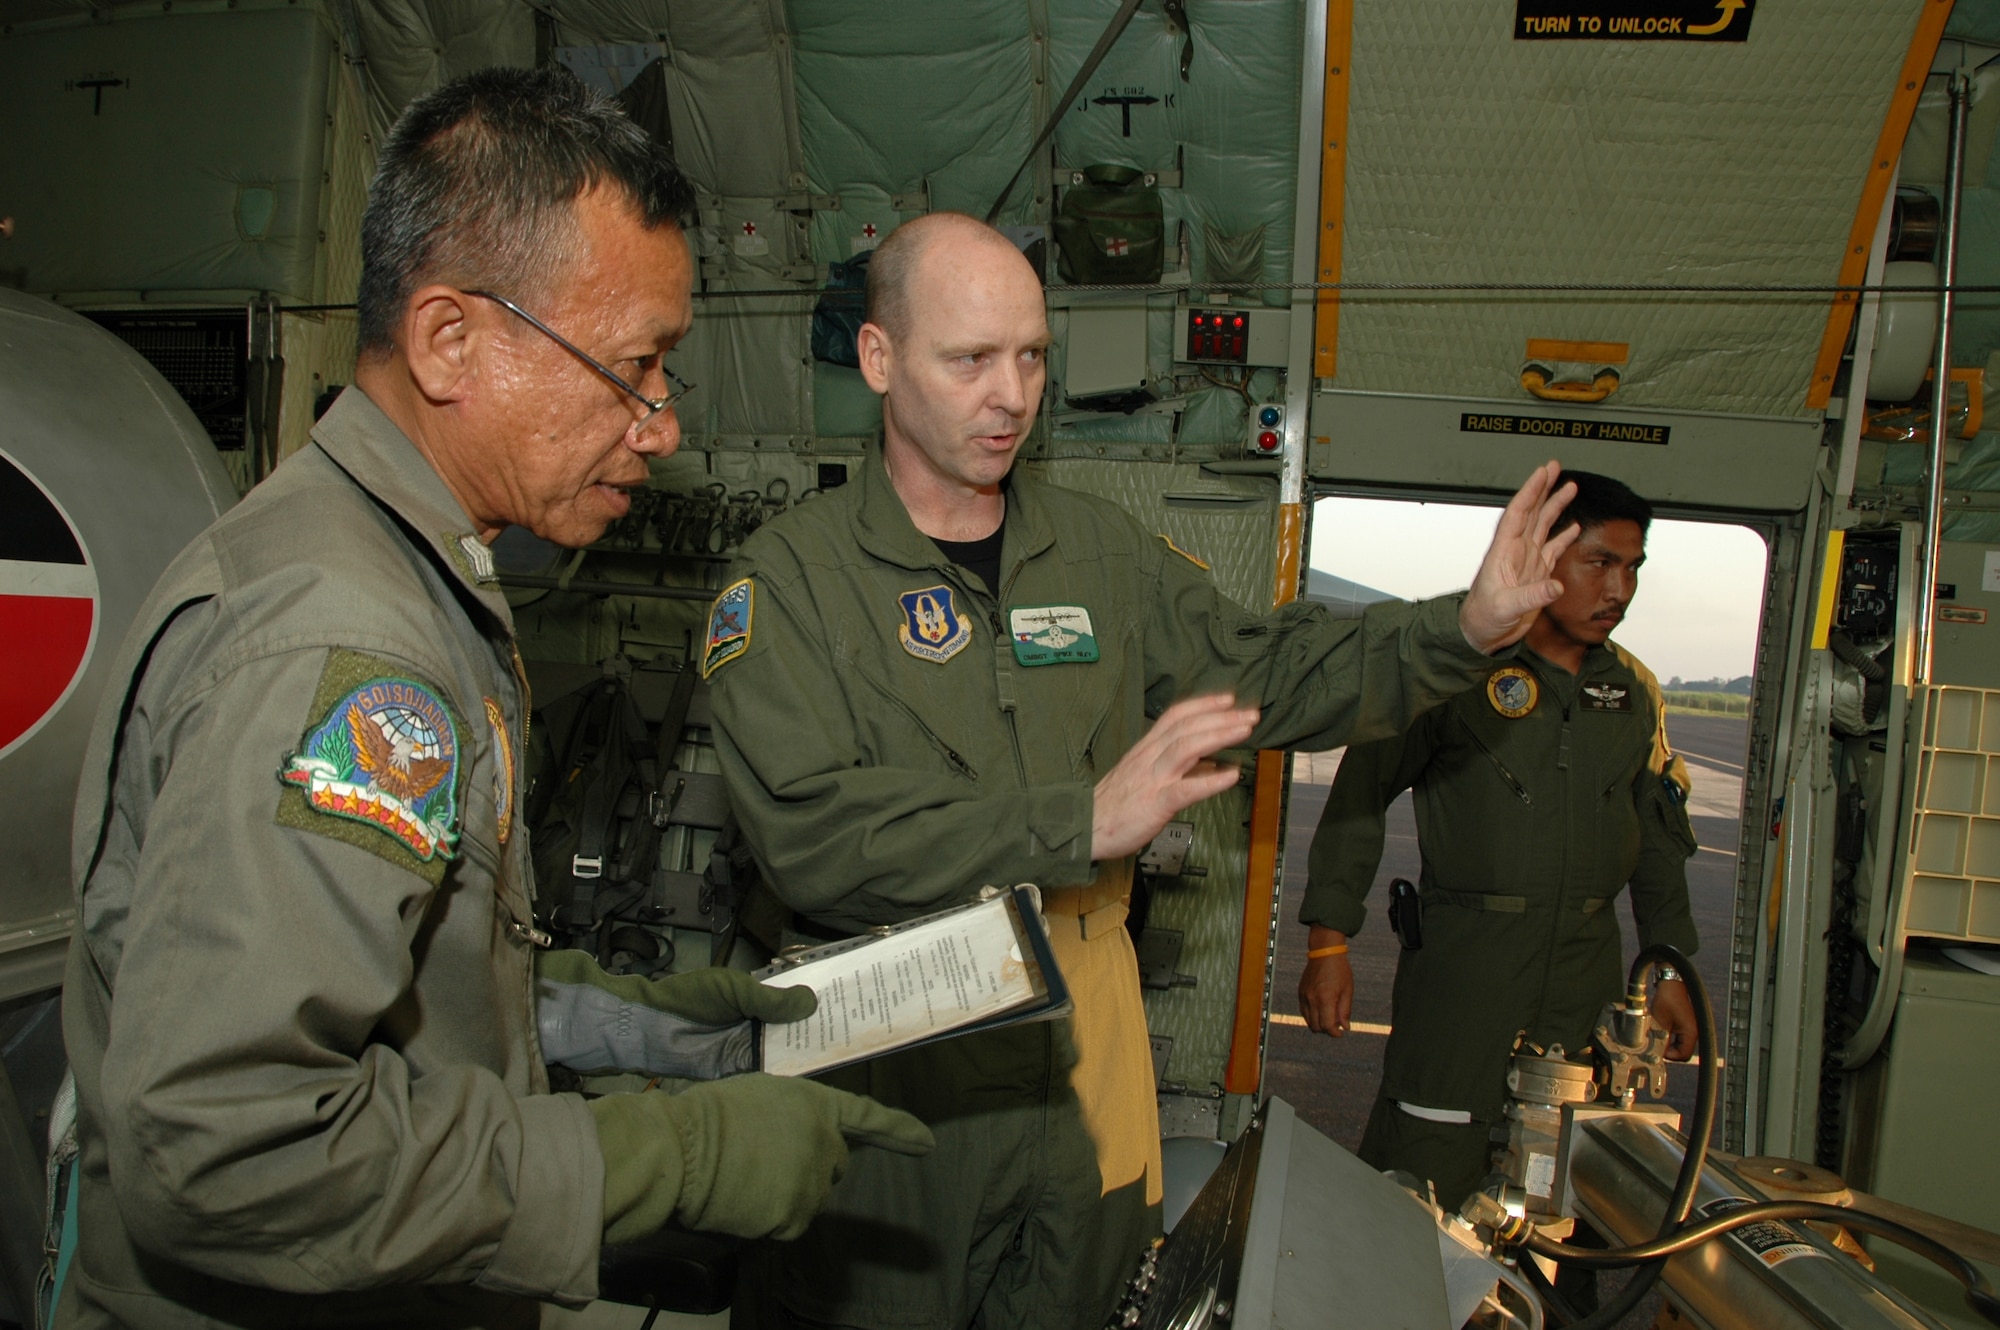 Chief Master Sgt. James D. Riley, chief loadmaster with the Air Force Reserve’s 302nd Airlift Wing discusses the Modular Airborne Firefighting System emergency procedures with Royal Thai Air Force loadmasters at Phitsanulok Royal Thai Air Force Base, Thailand.   Seven members of the Air Force Reserve’s 302 AW, based at Peterson AFB, Colo. were in Thailand providing expert training to RTAF members on safe and effective C-130 MAFFS operations.  This event marks the first time the Air Force Reserve has sent delegates to train a foreign Air Force on use of the MAFFS equipment. (U.S. Air Force photo/Capt. Jody L. Ritchie)